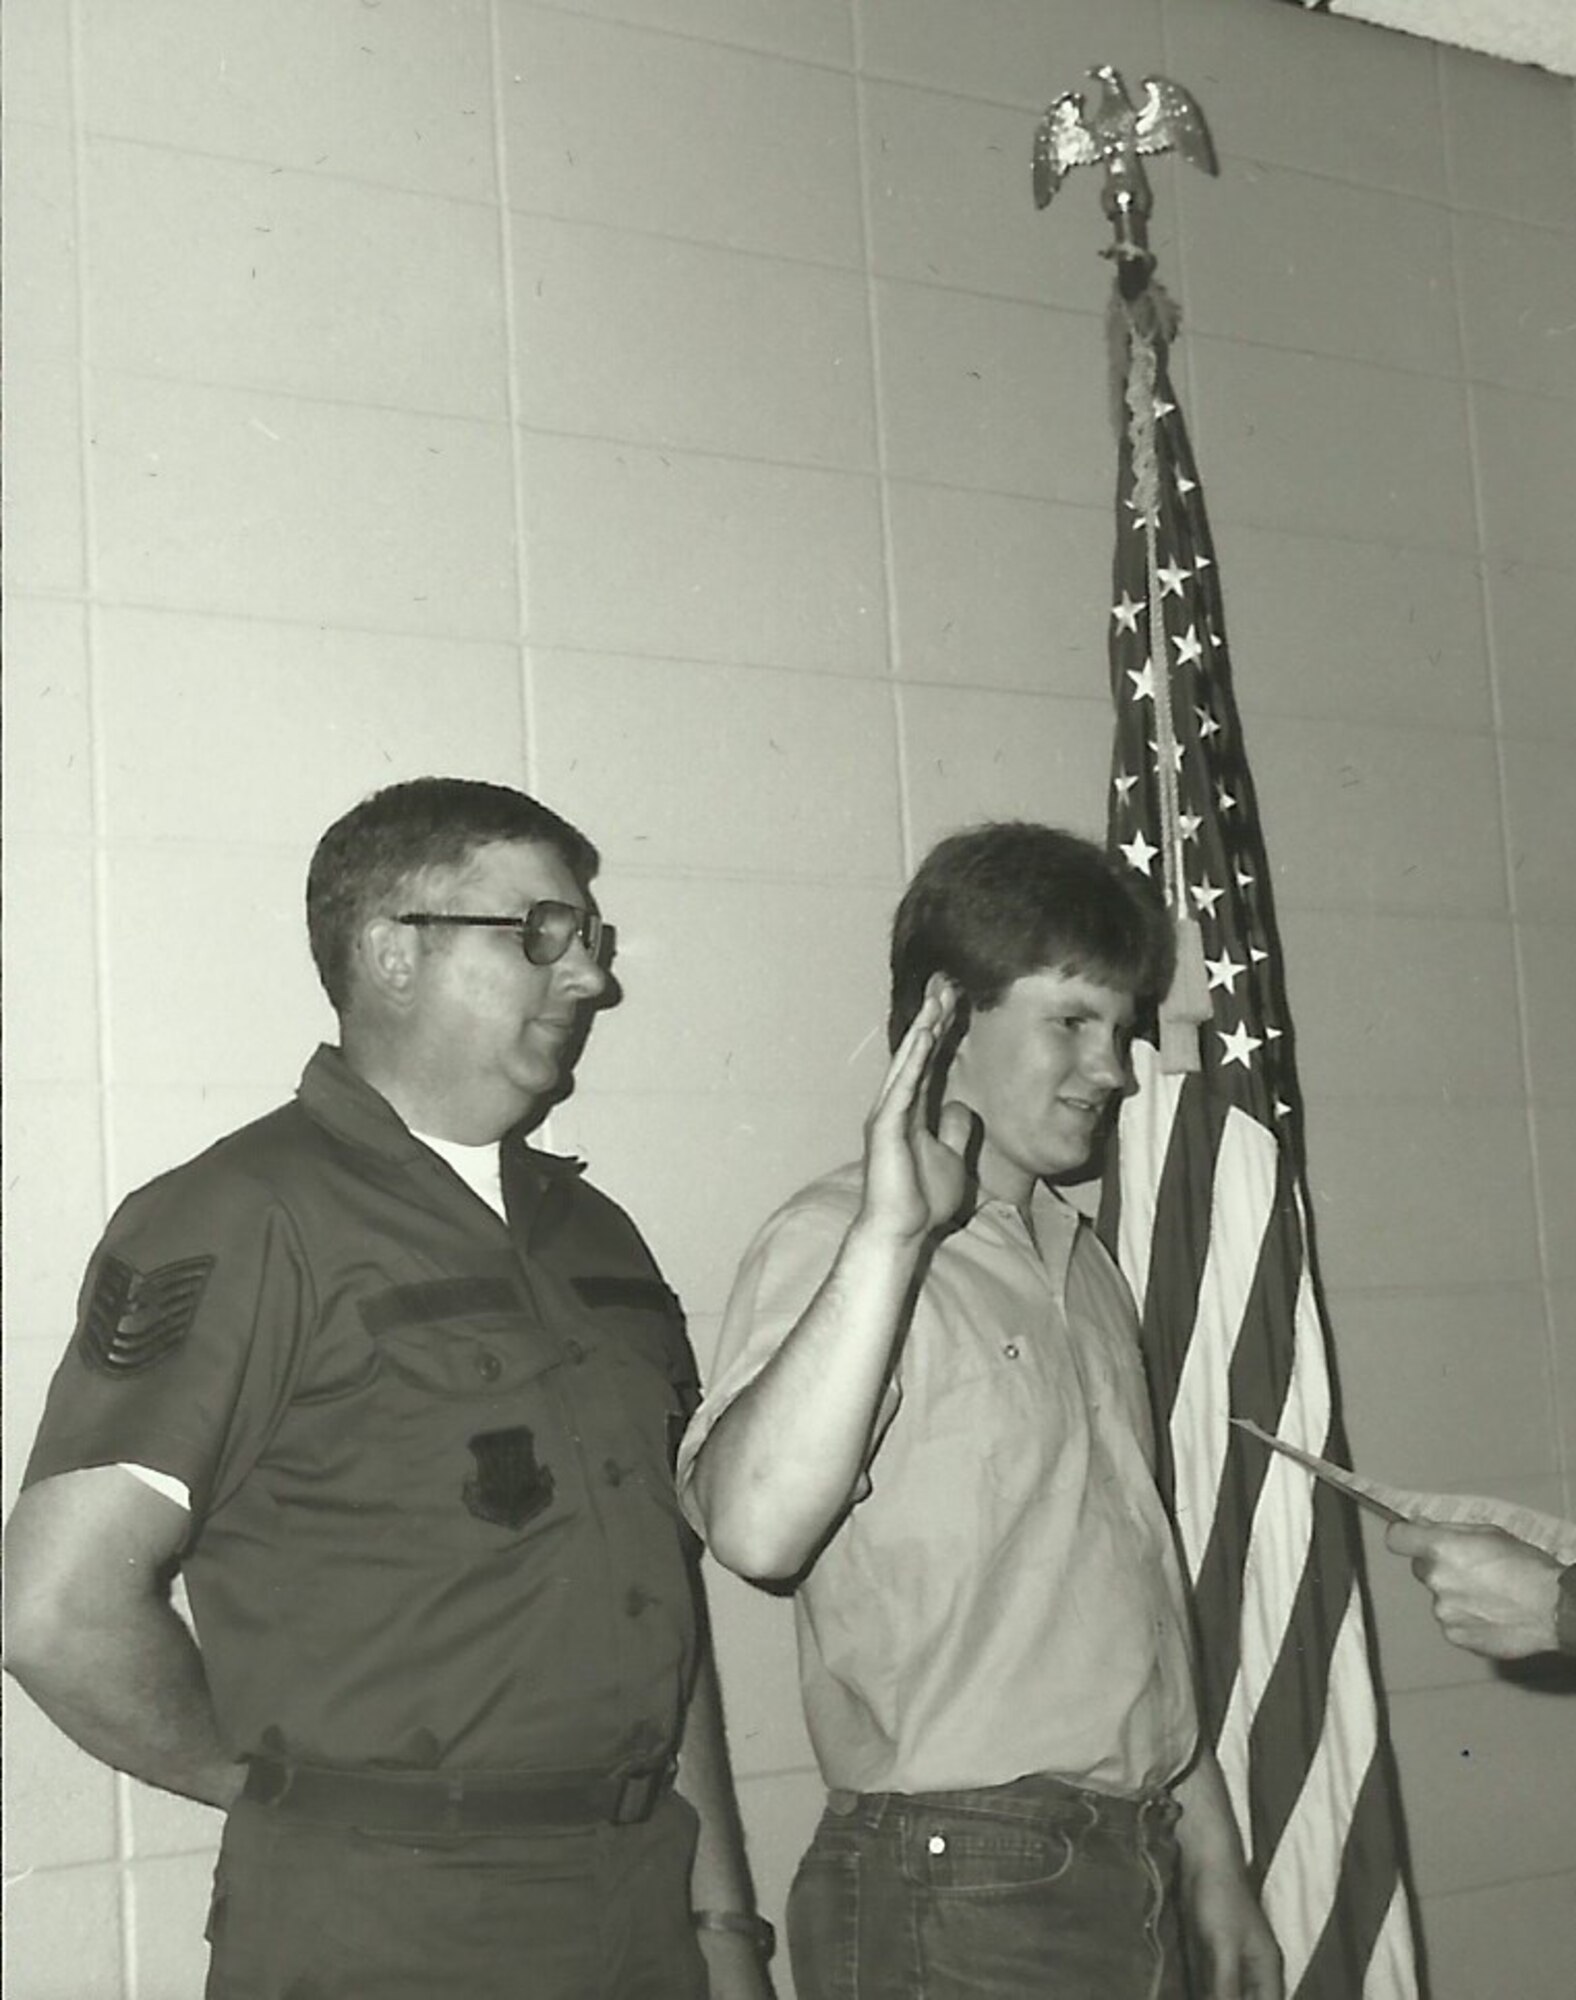 Master Sgt. John Konietzko (ret) watches as his son Kraig Konietzko takes the oath of enlistment at the 148th Fighter Wing in 1985. (courtesy photo)